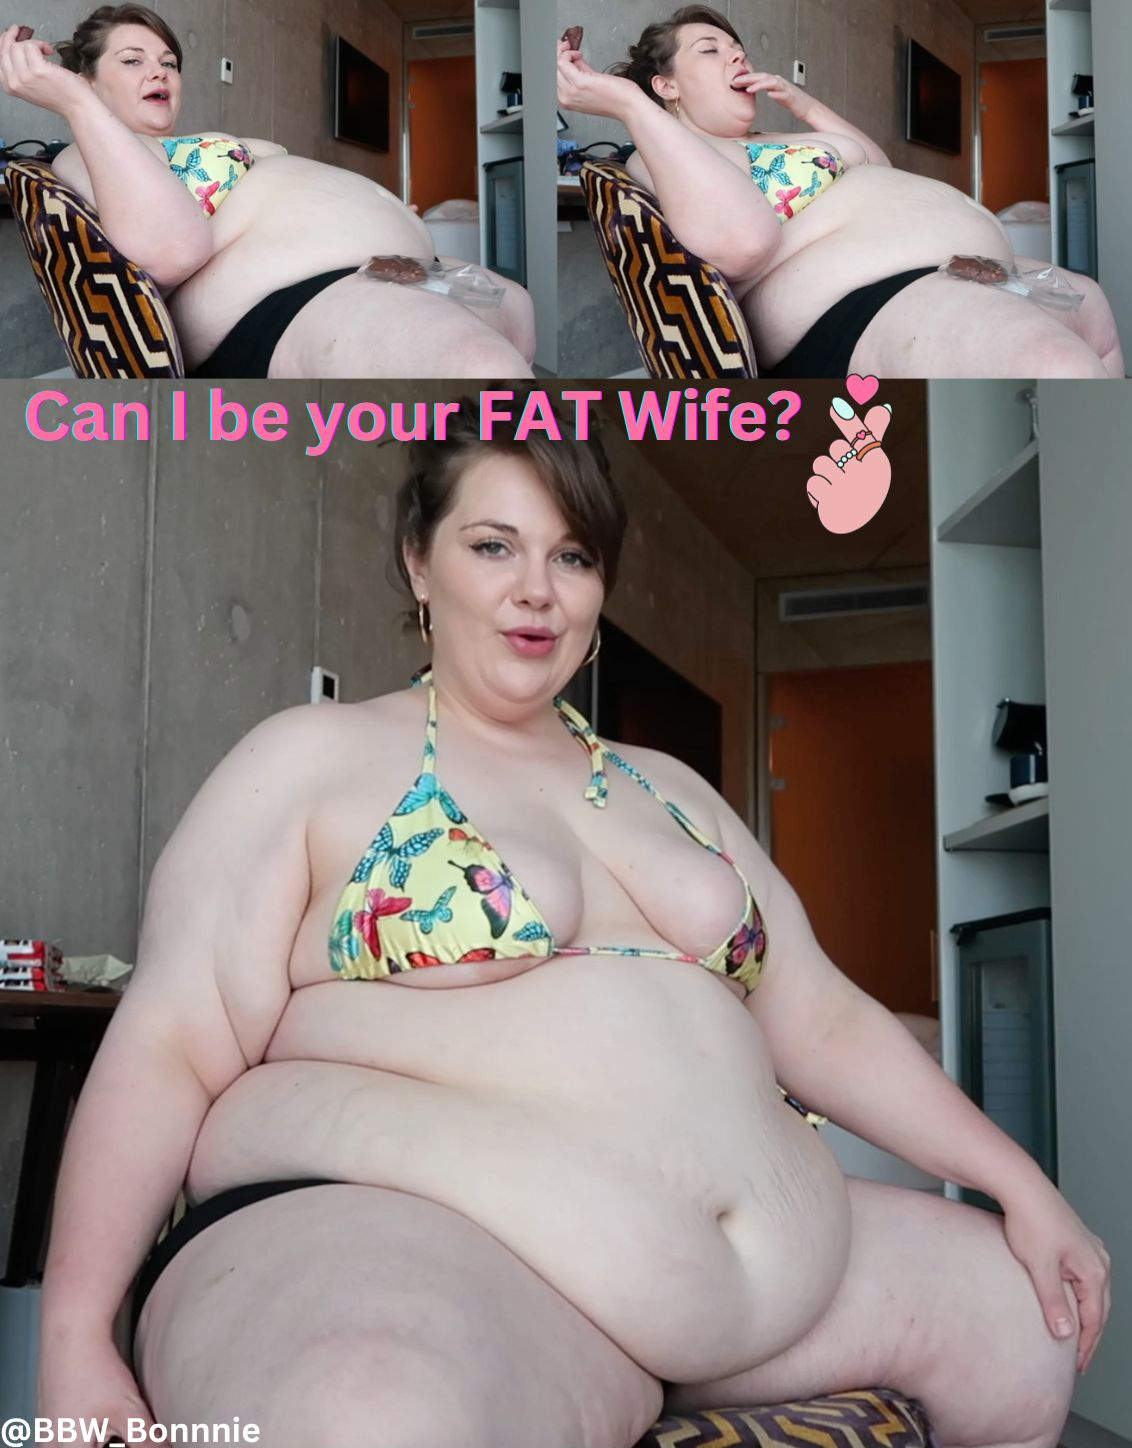 Can I be your FAT wife promo pic.jpg